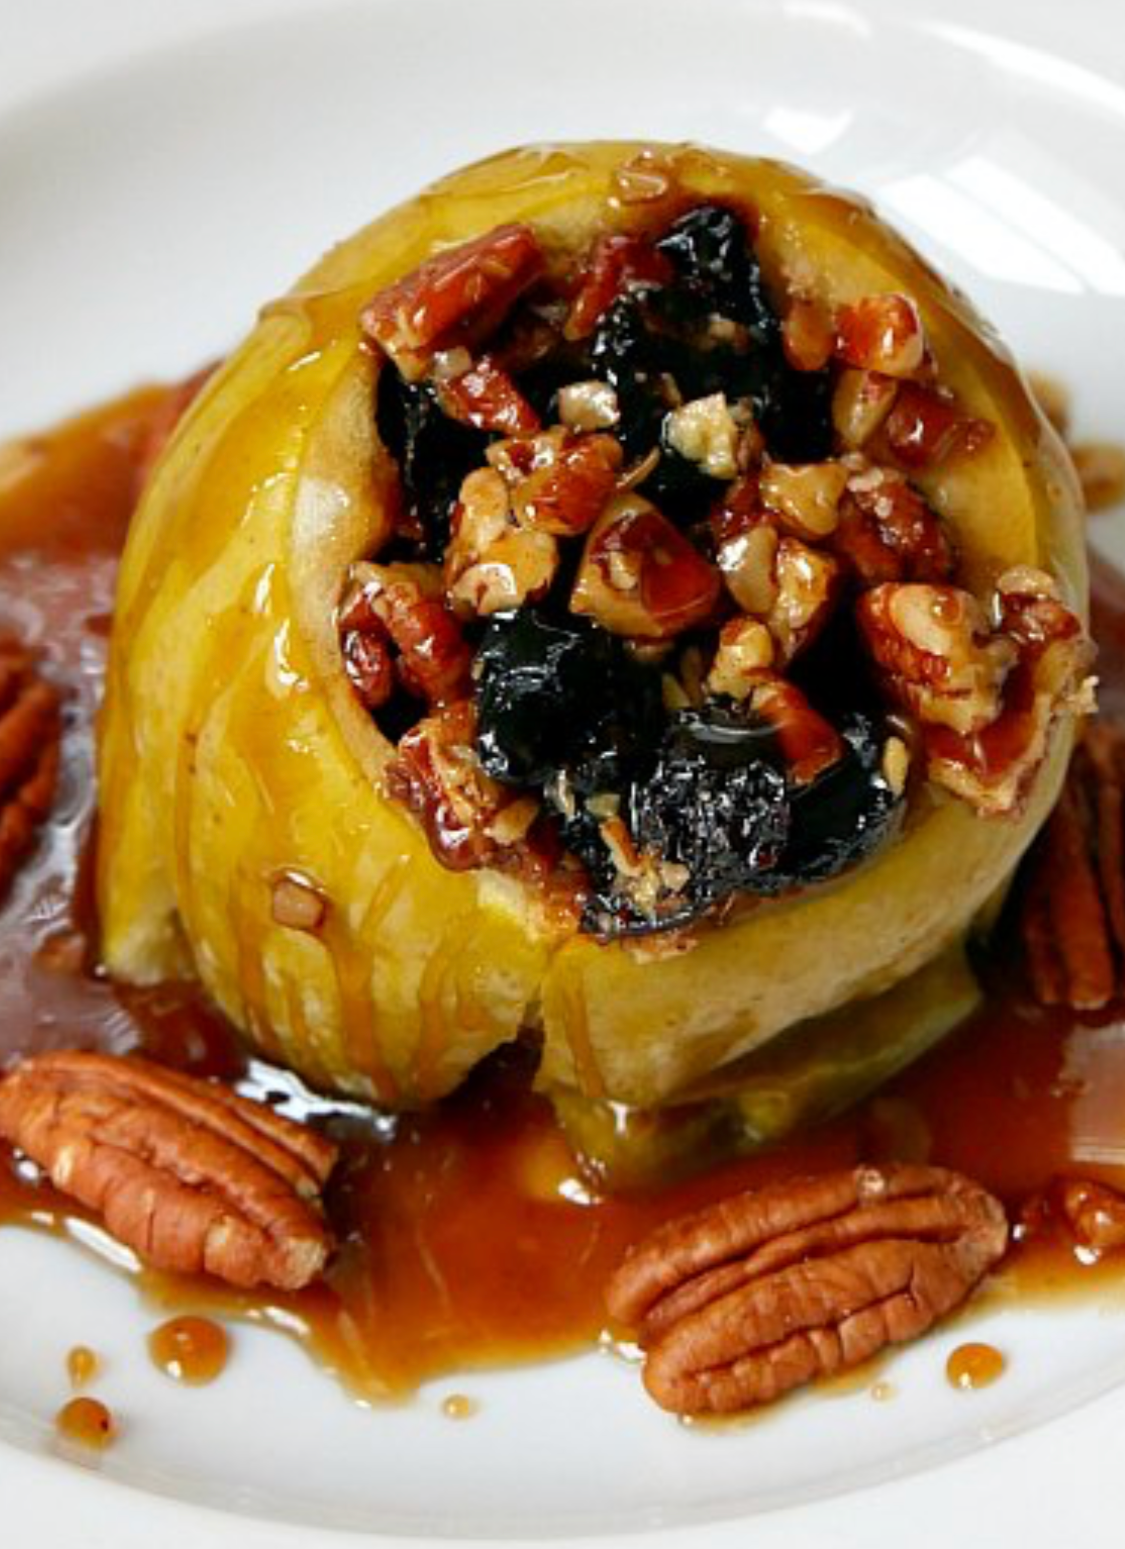 Pecan Caramel Slow Cooker "Baked" Apple in Clay